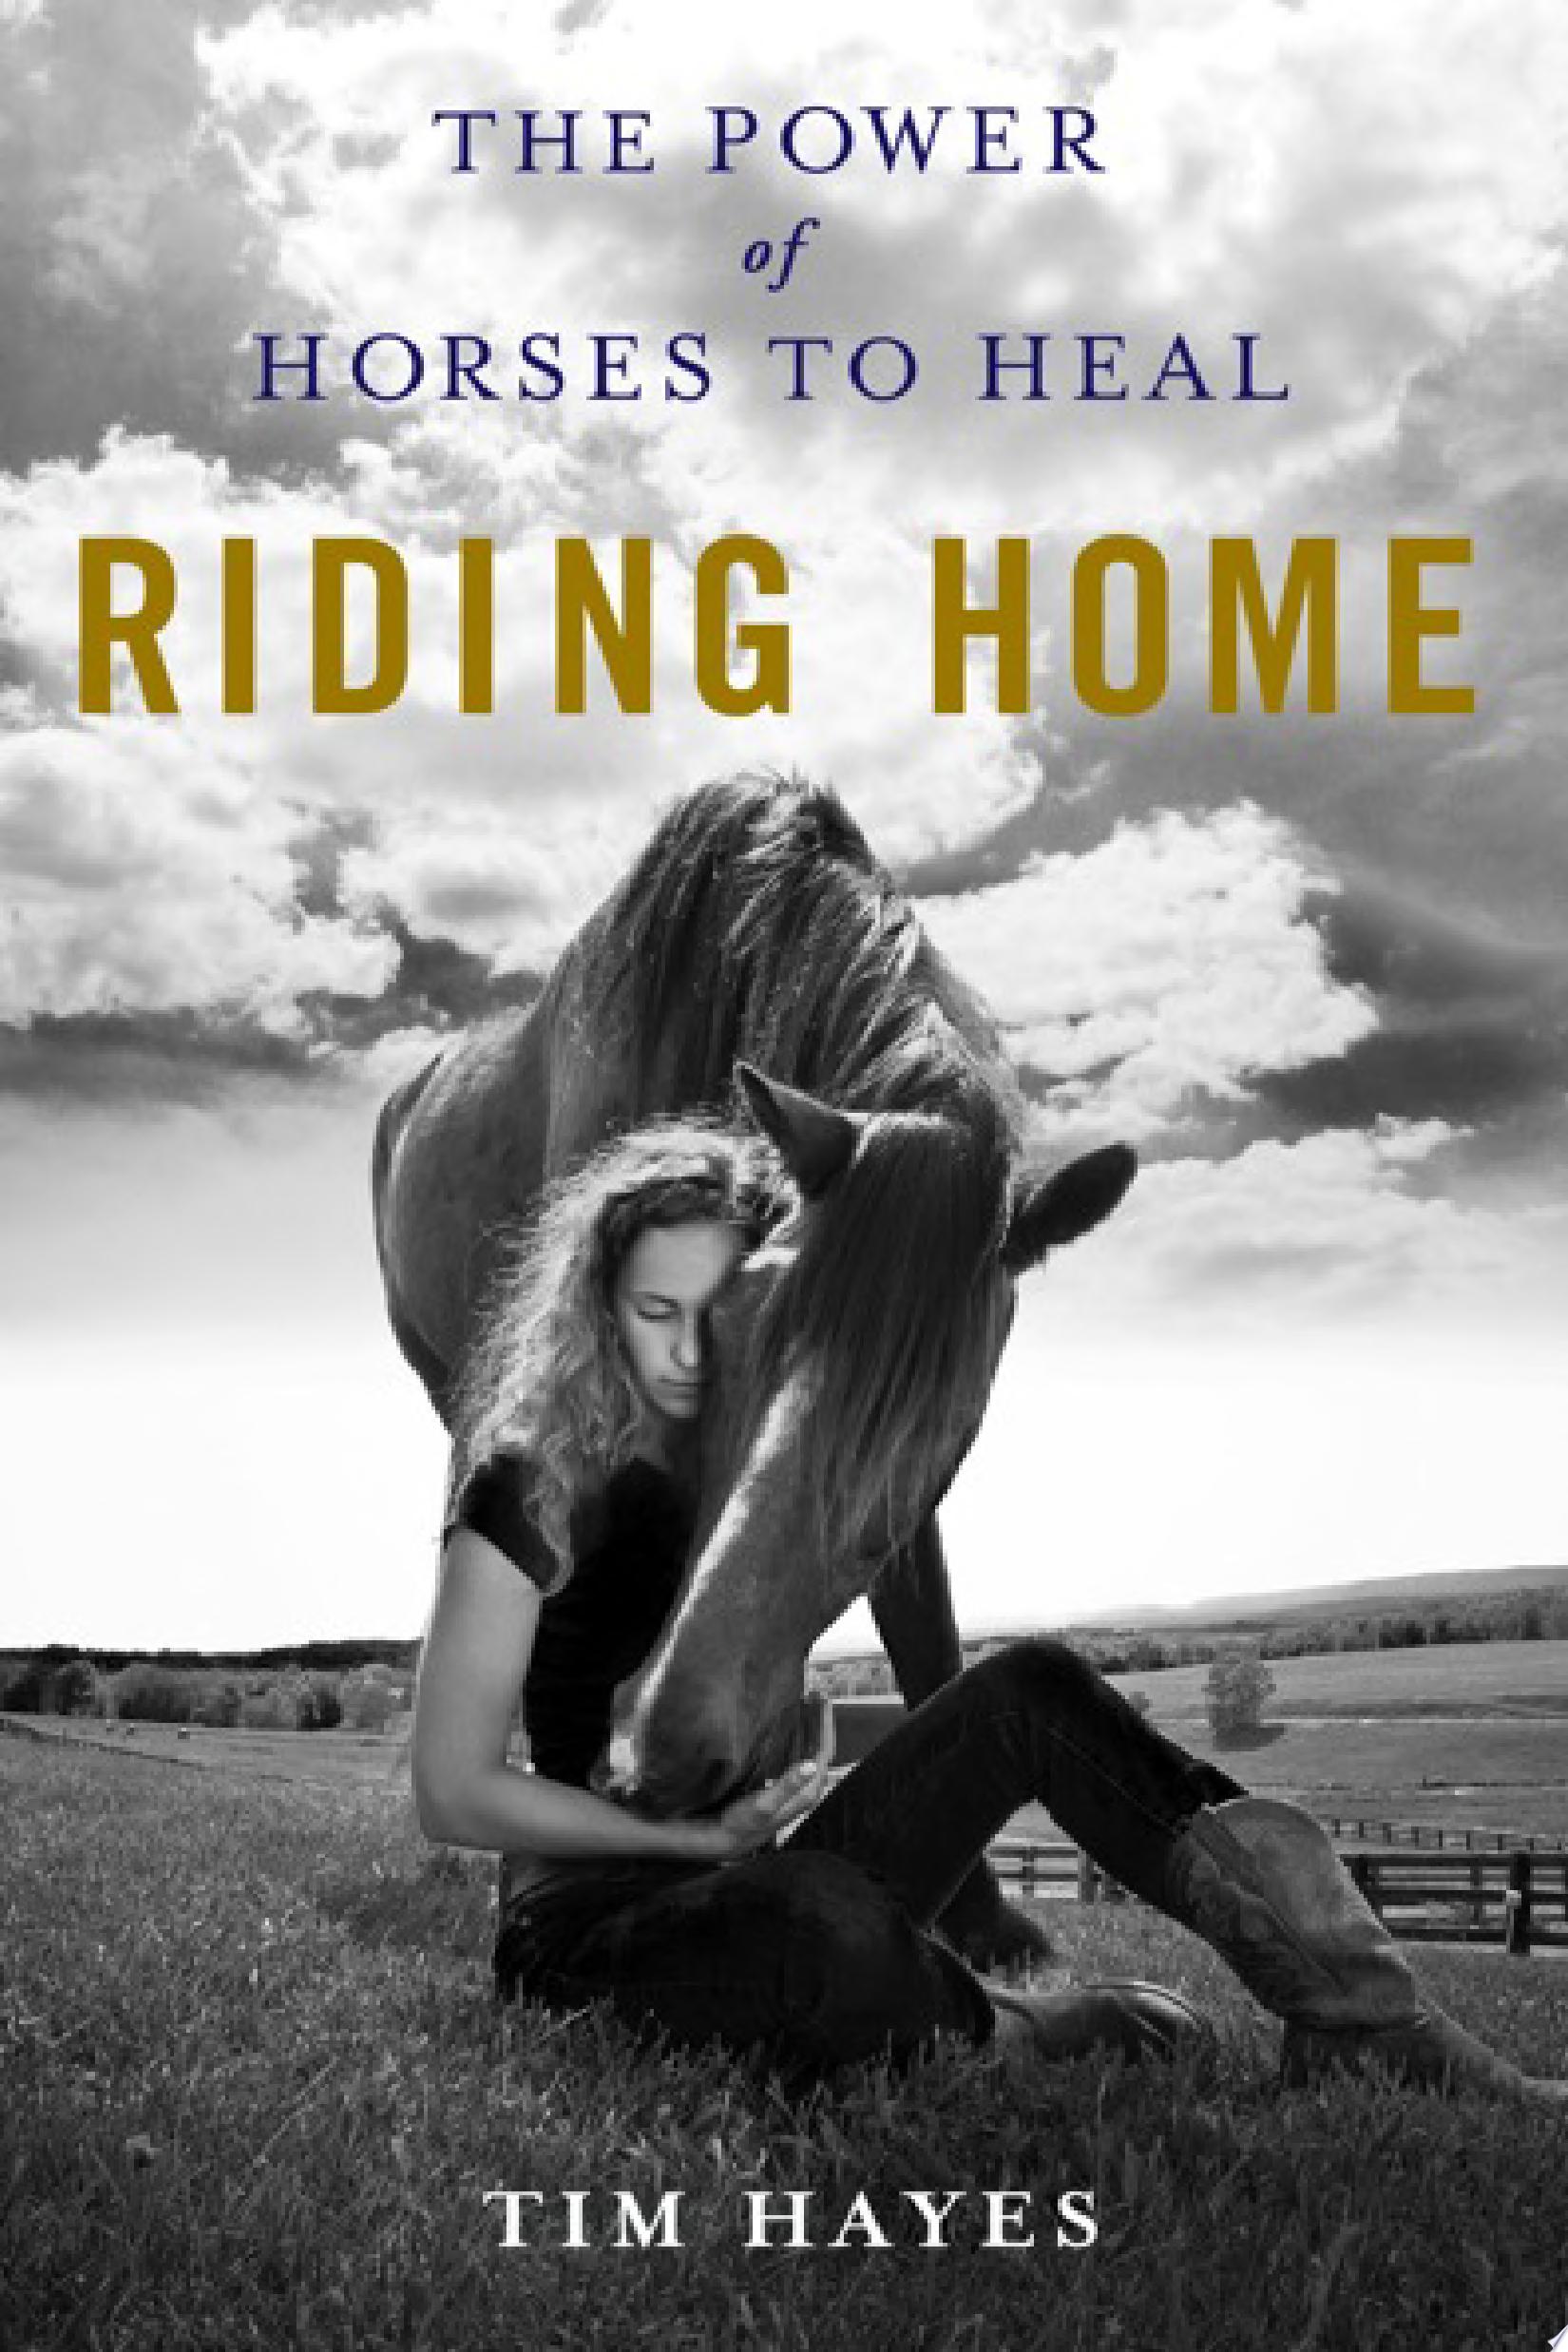 Image for "Riding Home"